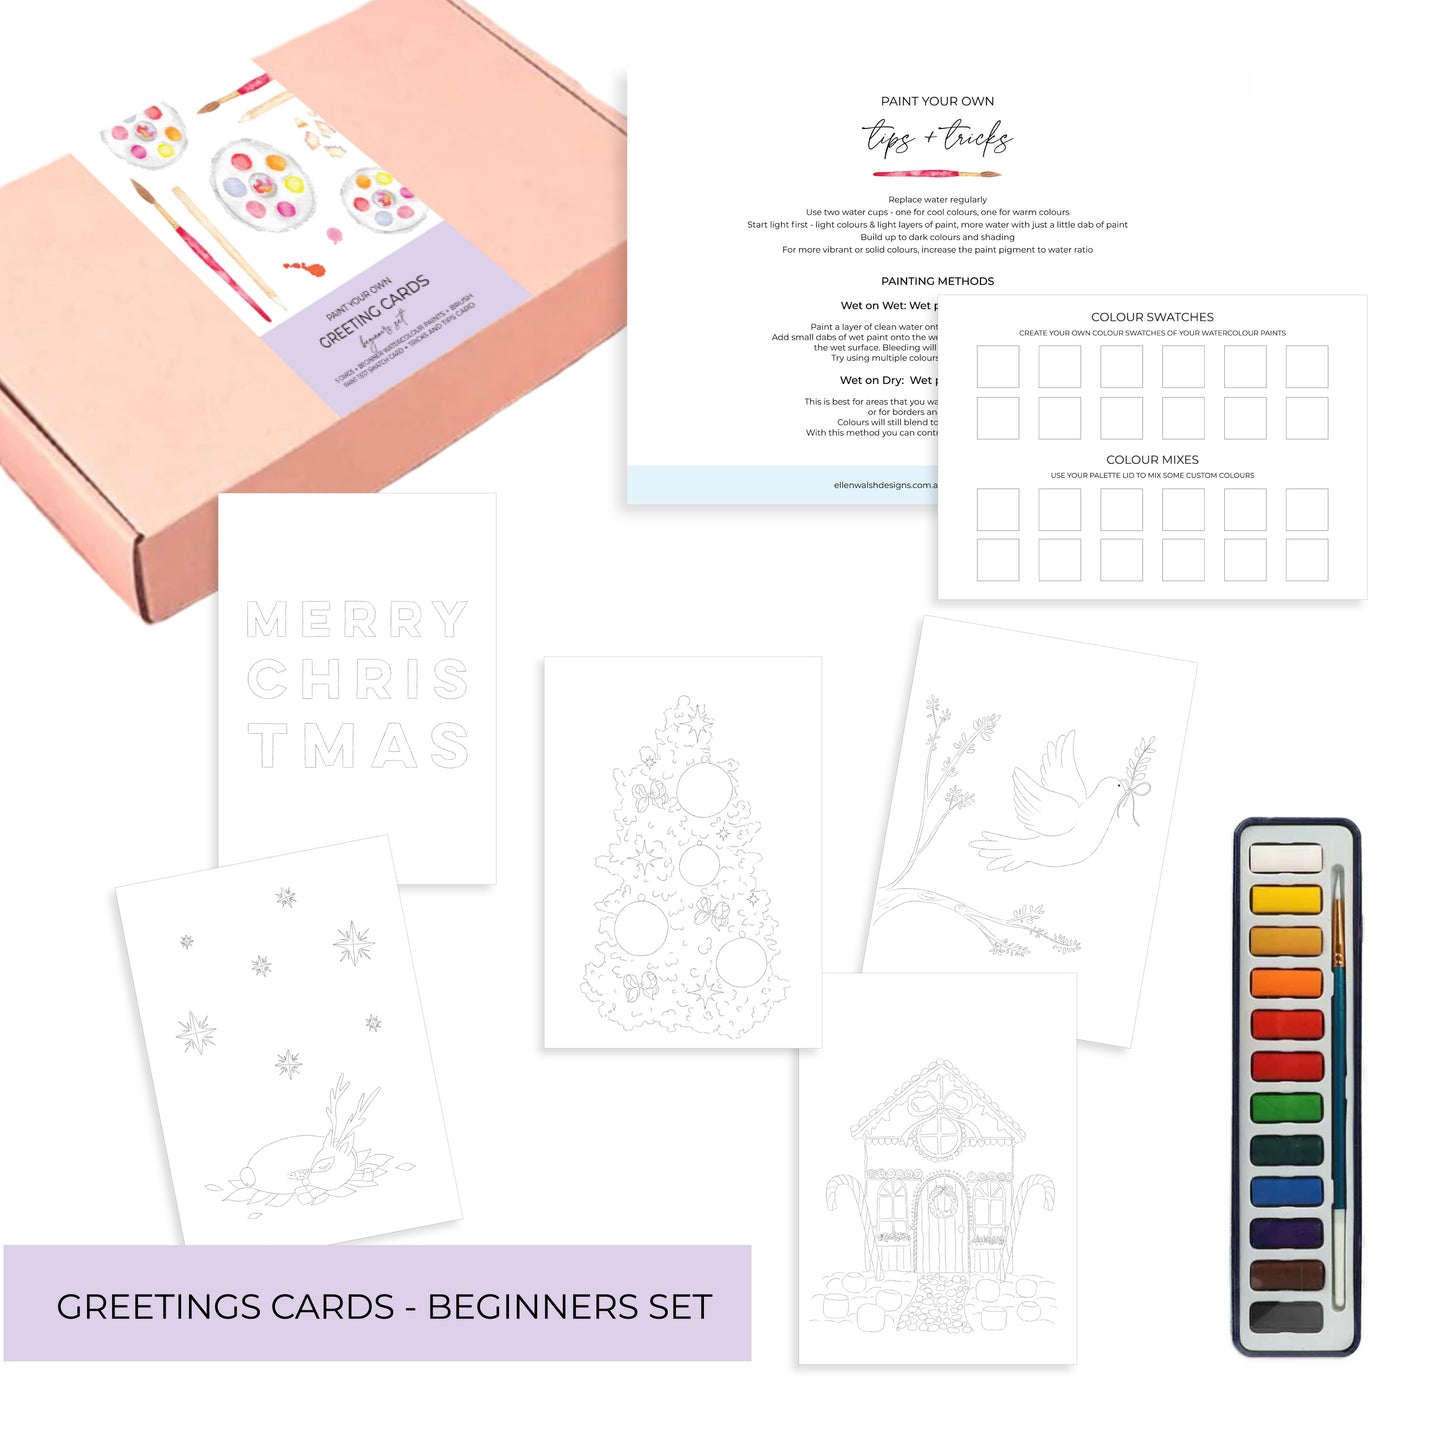 Christmas Cards - Paint Your Own Watercolour Set